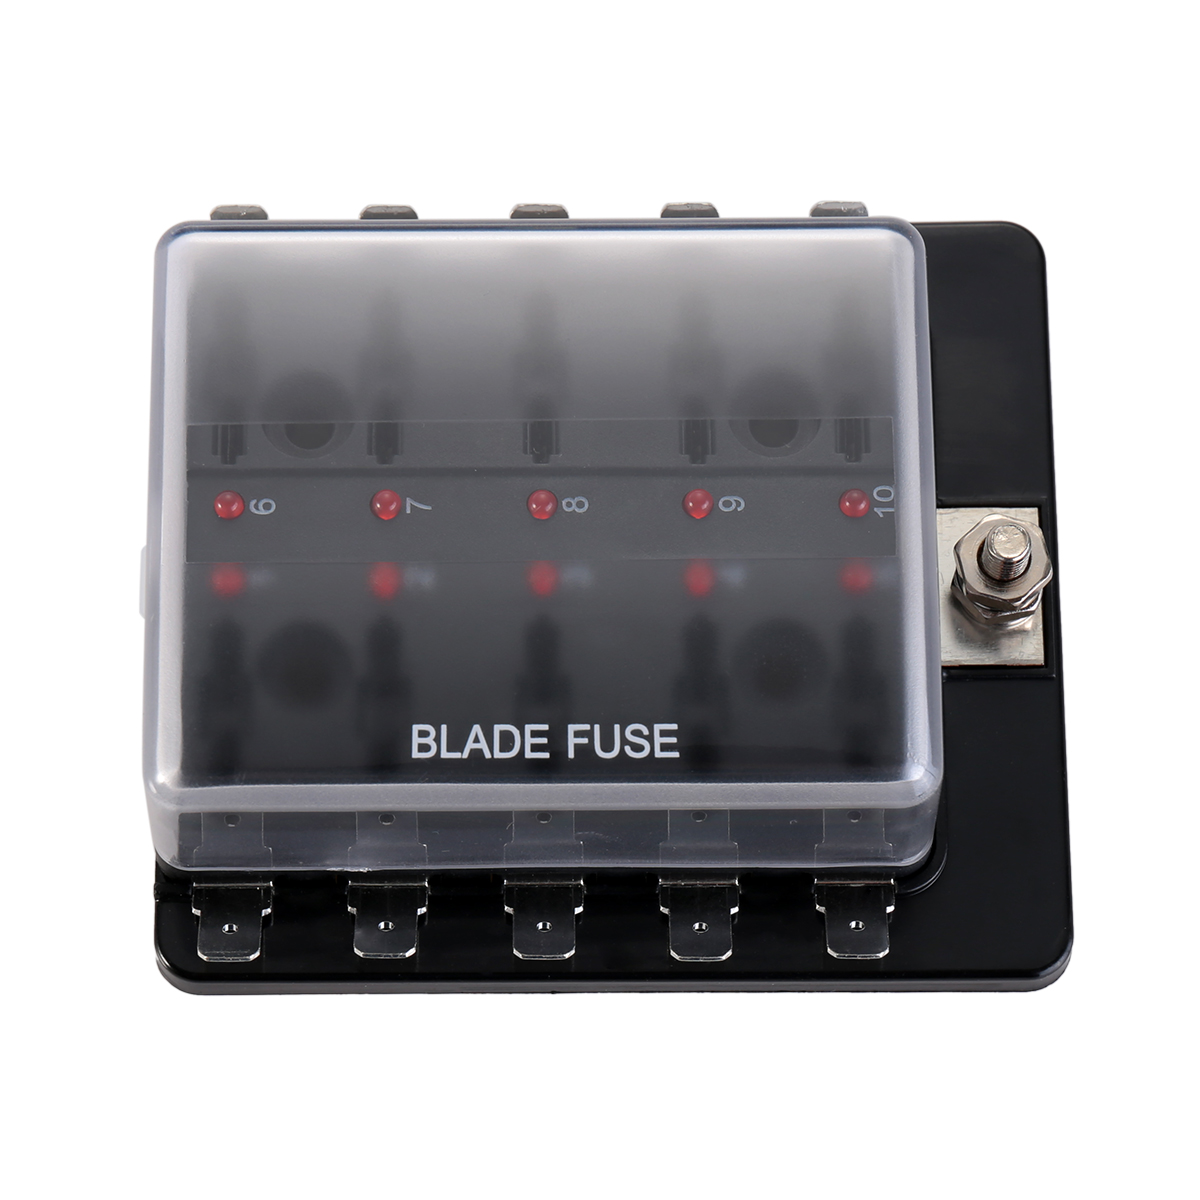 Car Boat 1 in 10 Way Blade Fuse Box Holder with LED Warning Light Box